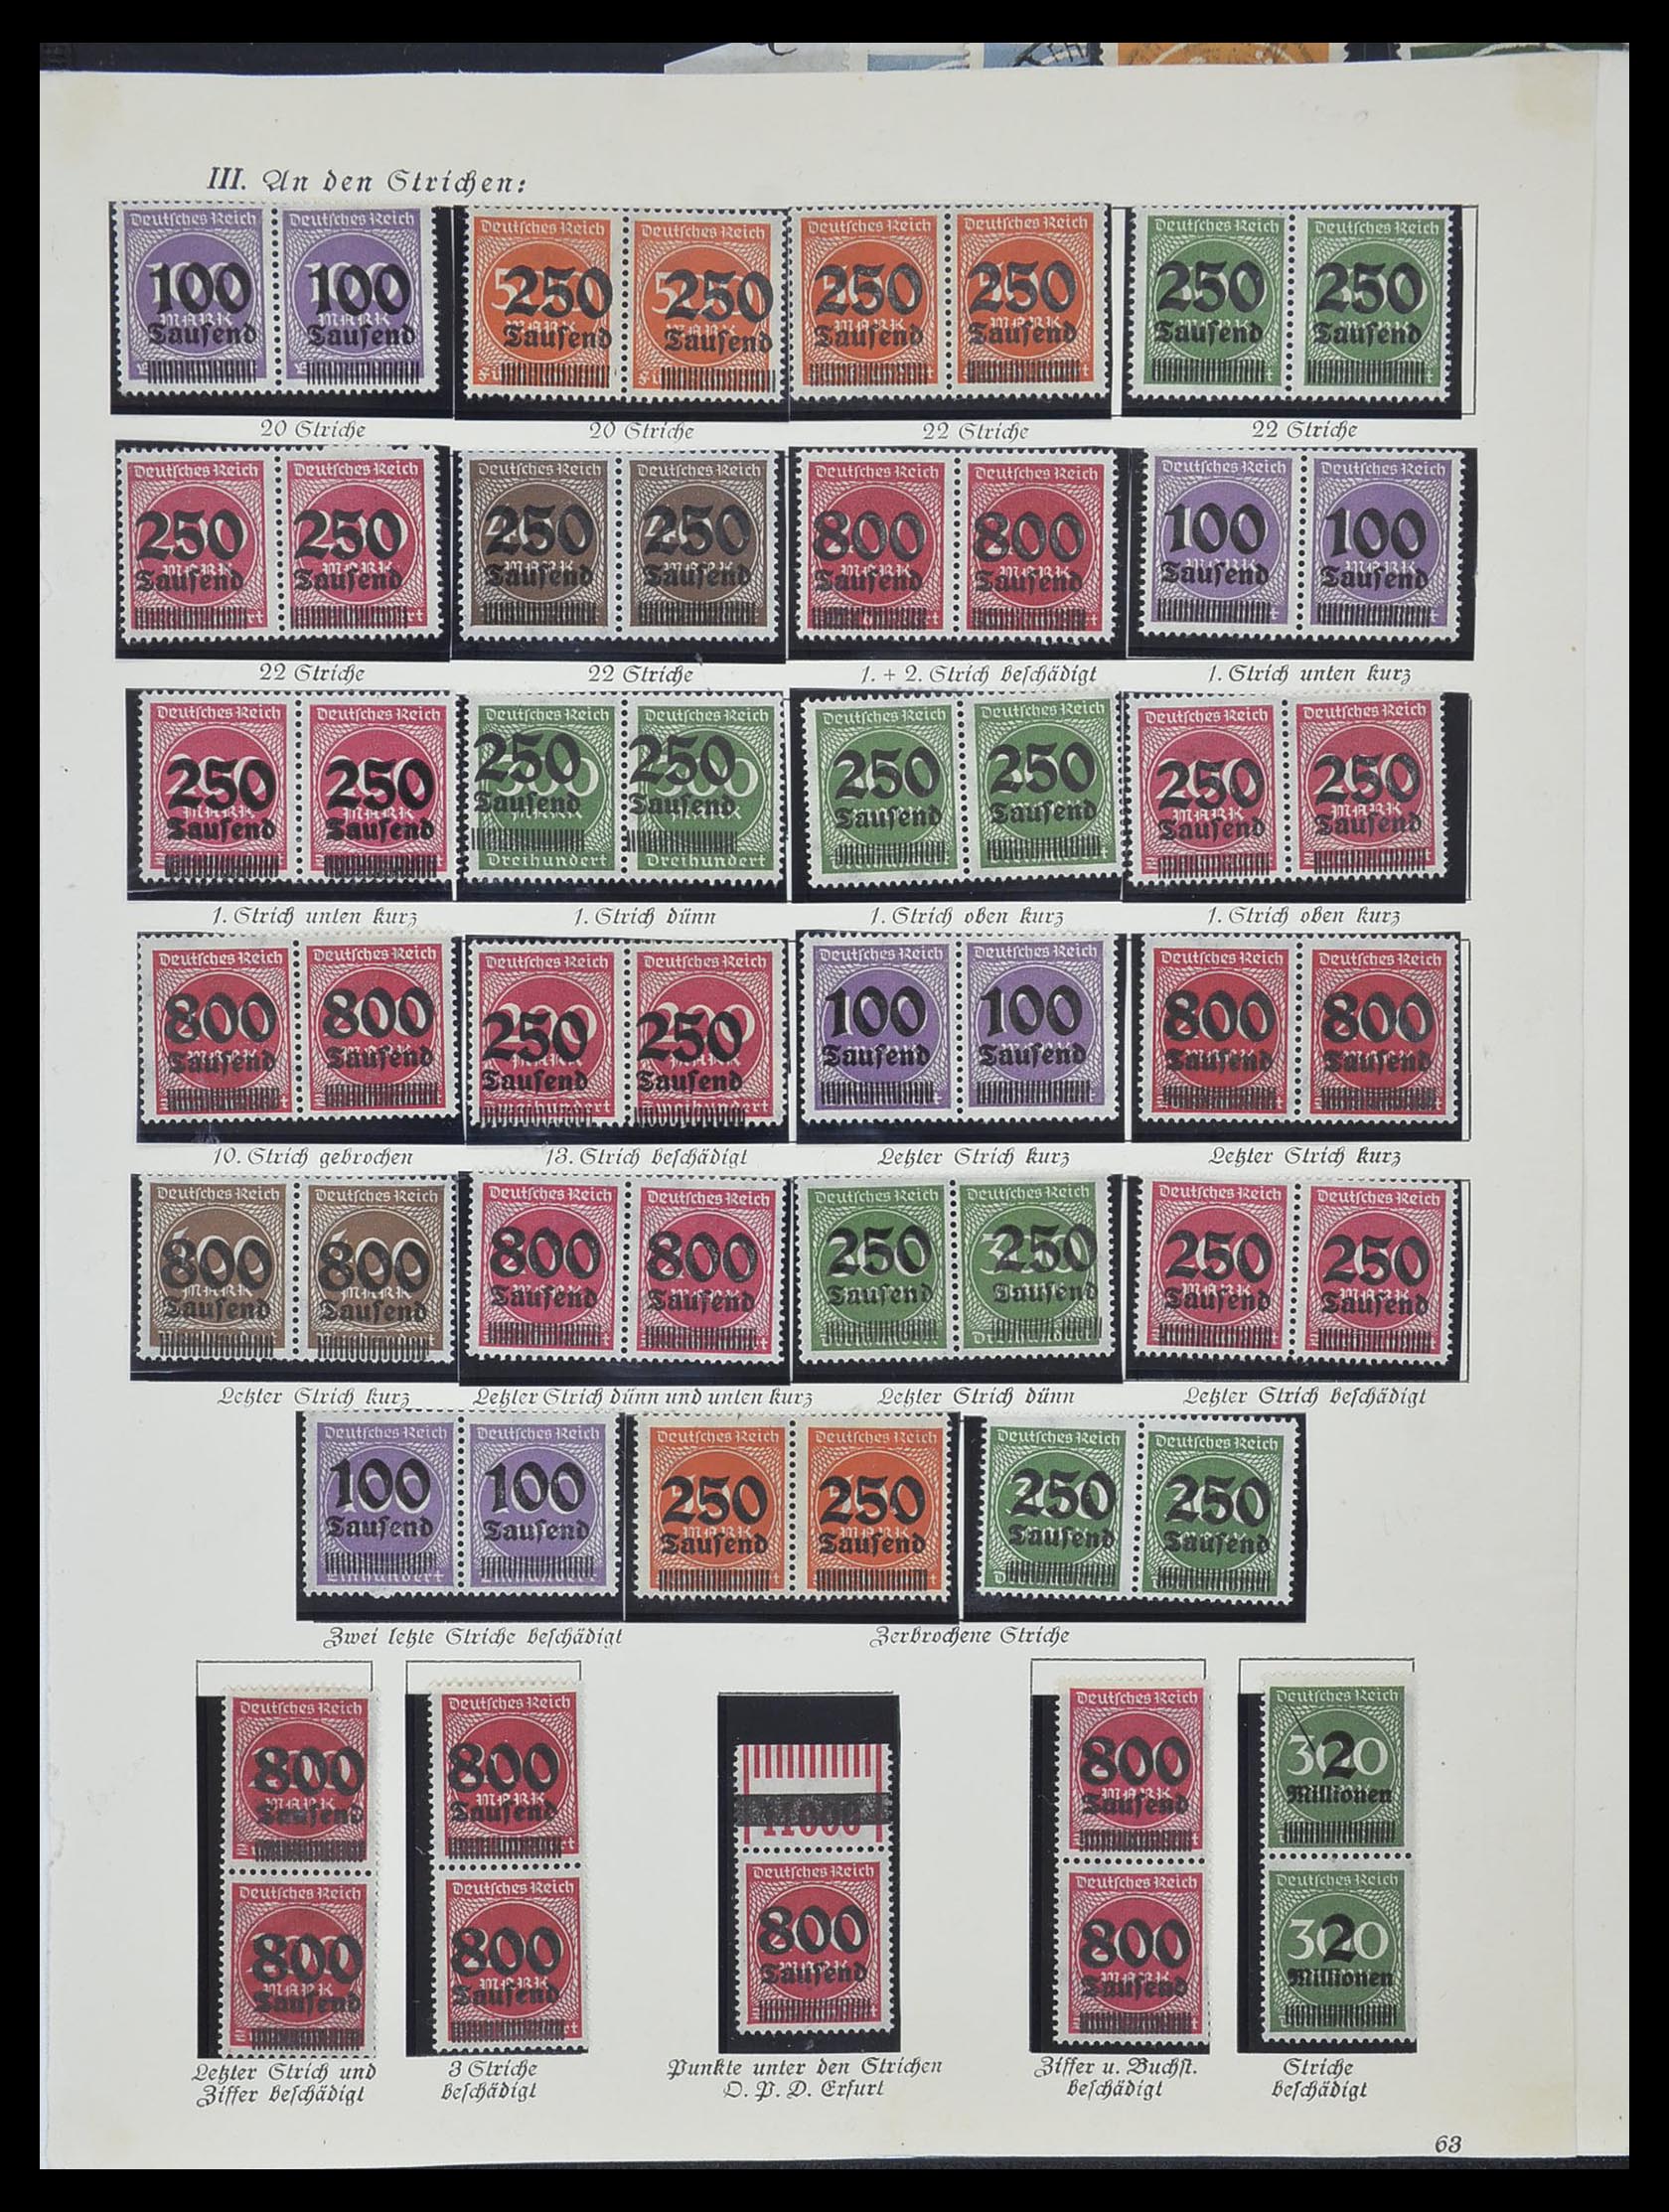 33957 029 - Stamp collection 33957 German Reich infla 1923.